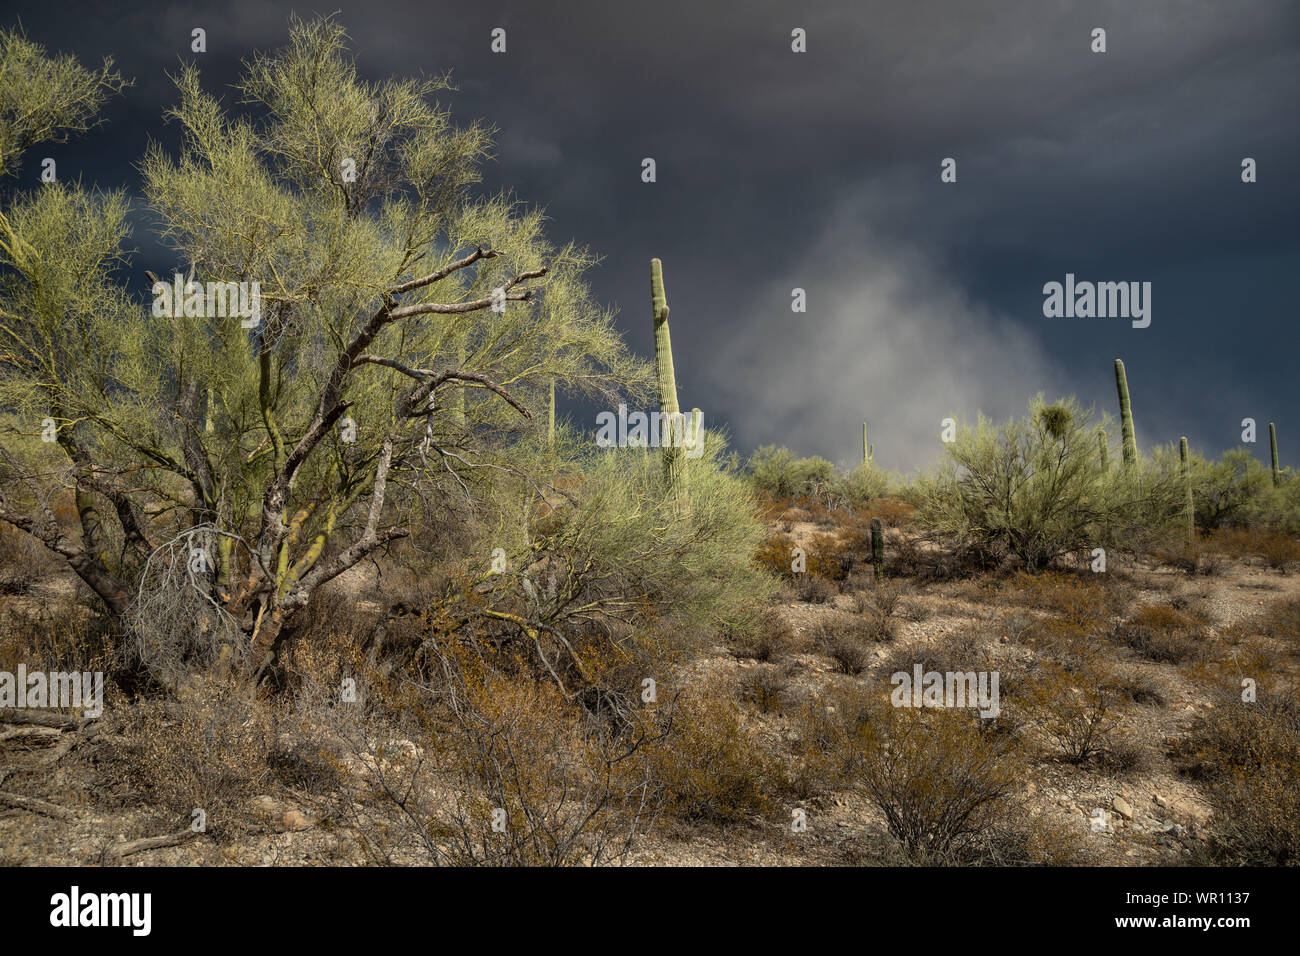 Thunderstorm outflow winds kick up a plume of blowing dust over the Sonoyta Valley in Organ Pipe Cactus National Monument, Pima County, Arizona, USA Stock Photo